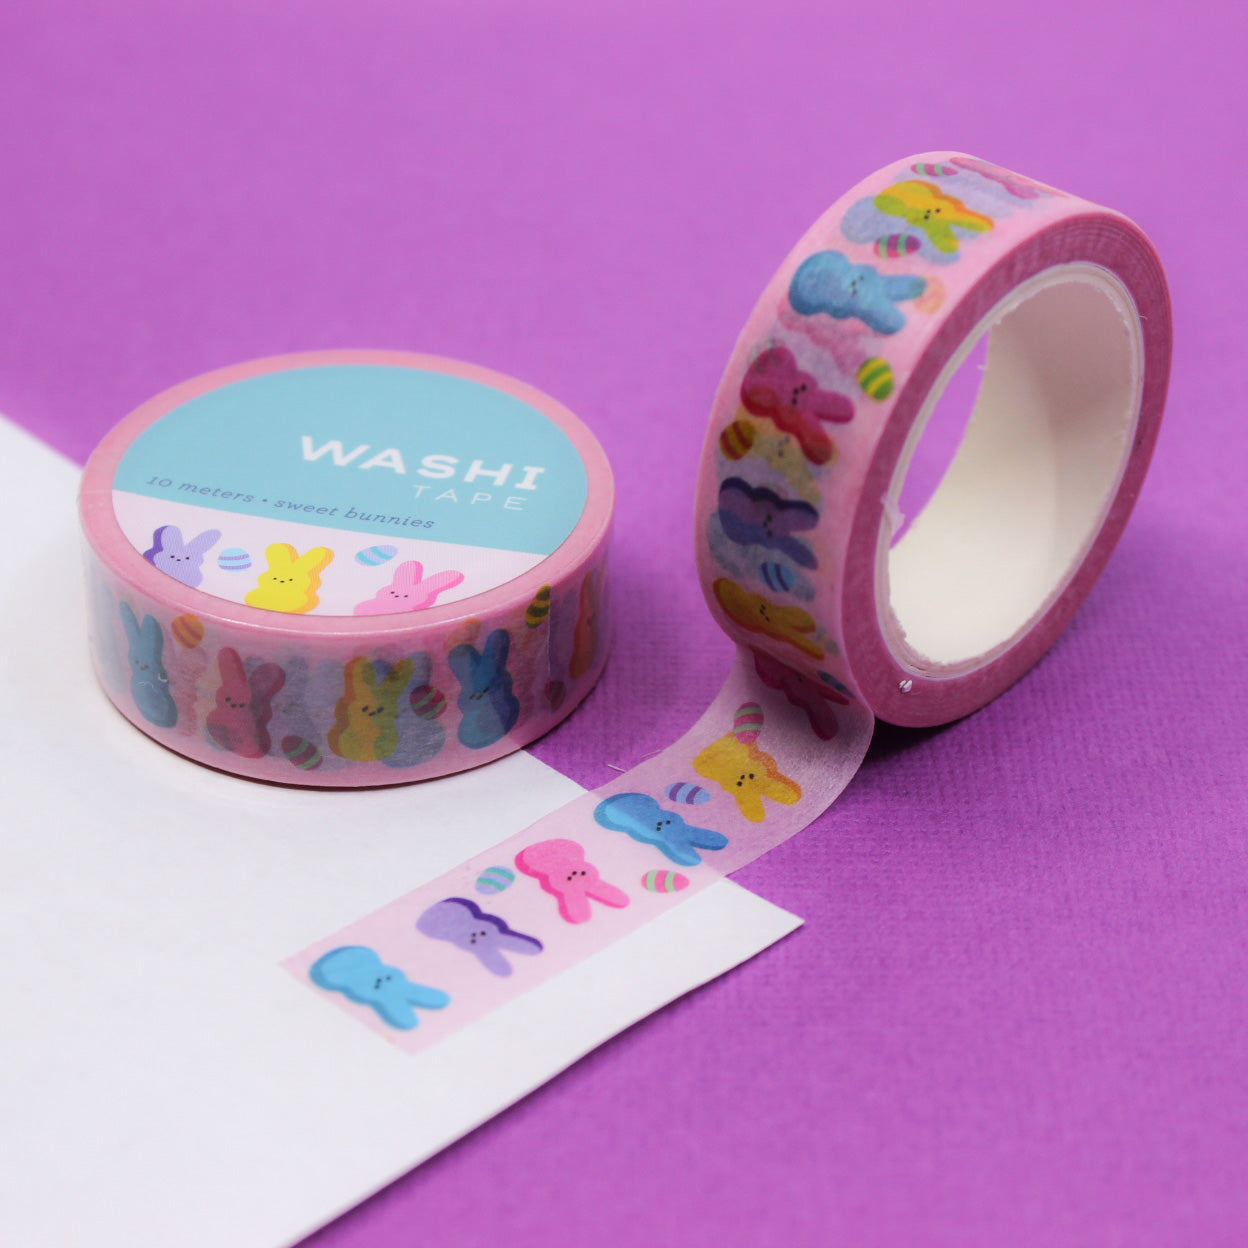 Add a sweet and whimsical touch to your Easter crafts with this delightful washi tape featuring cute bunnies and colorful candies. Perfect for decorating Easter cards, gift wrapping, and more. This tape is designed by Girl of Work and sold at BBB Supplies Craft Shop.